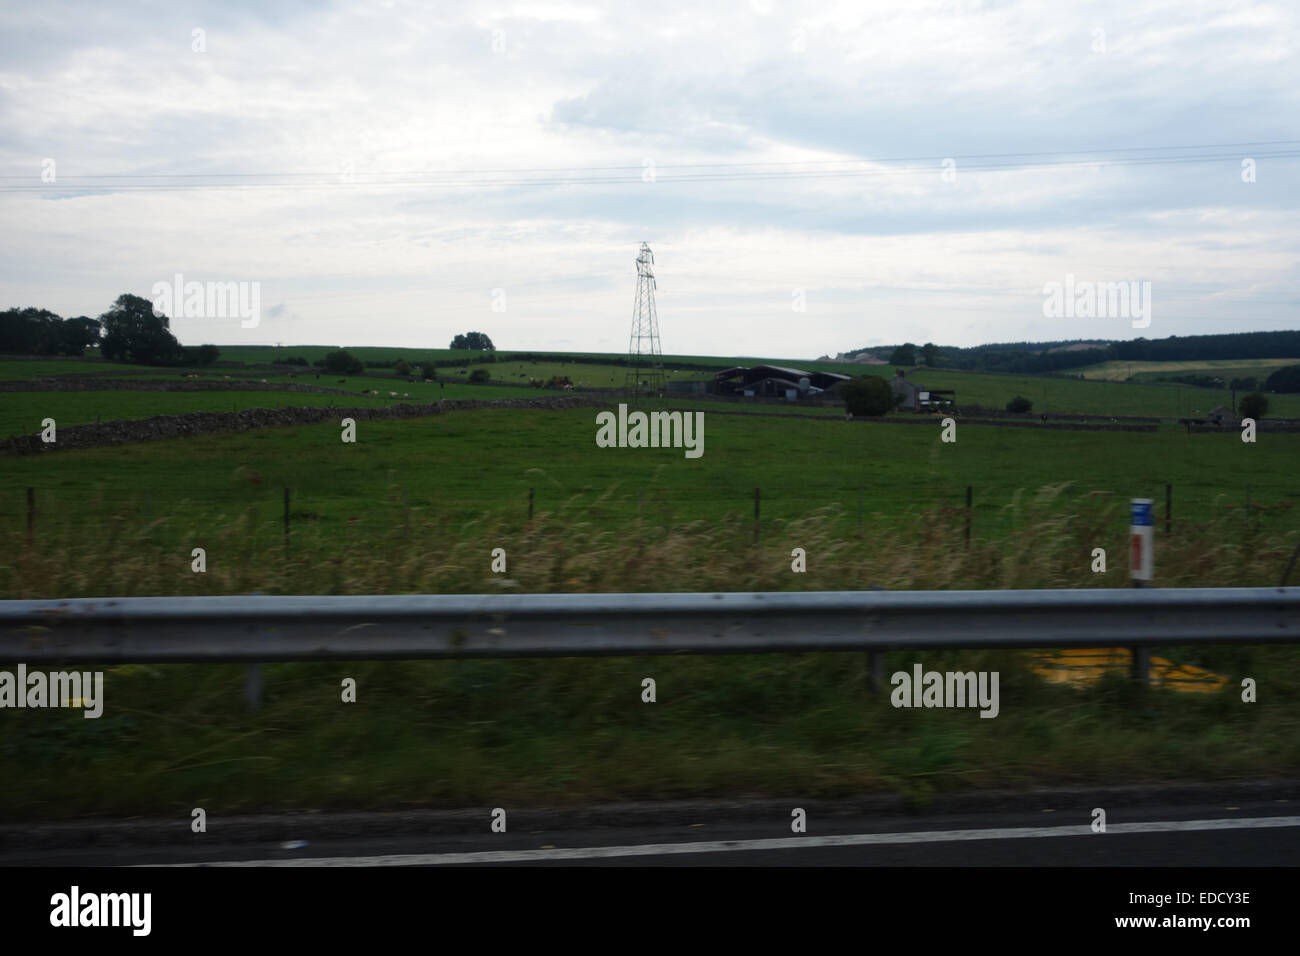 Motorway trip Windsor Glasgow varying conditions M40/M6/M74 July 2014 sun rain wind lots little other traffic  changing scenery Stock Photo